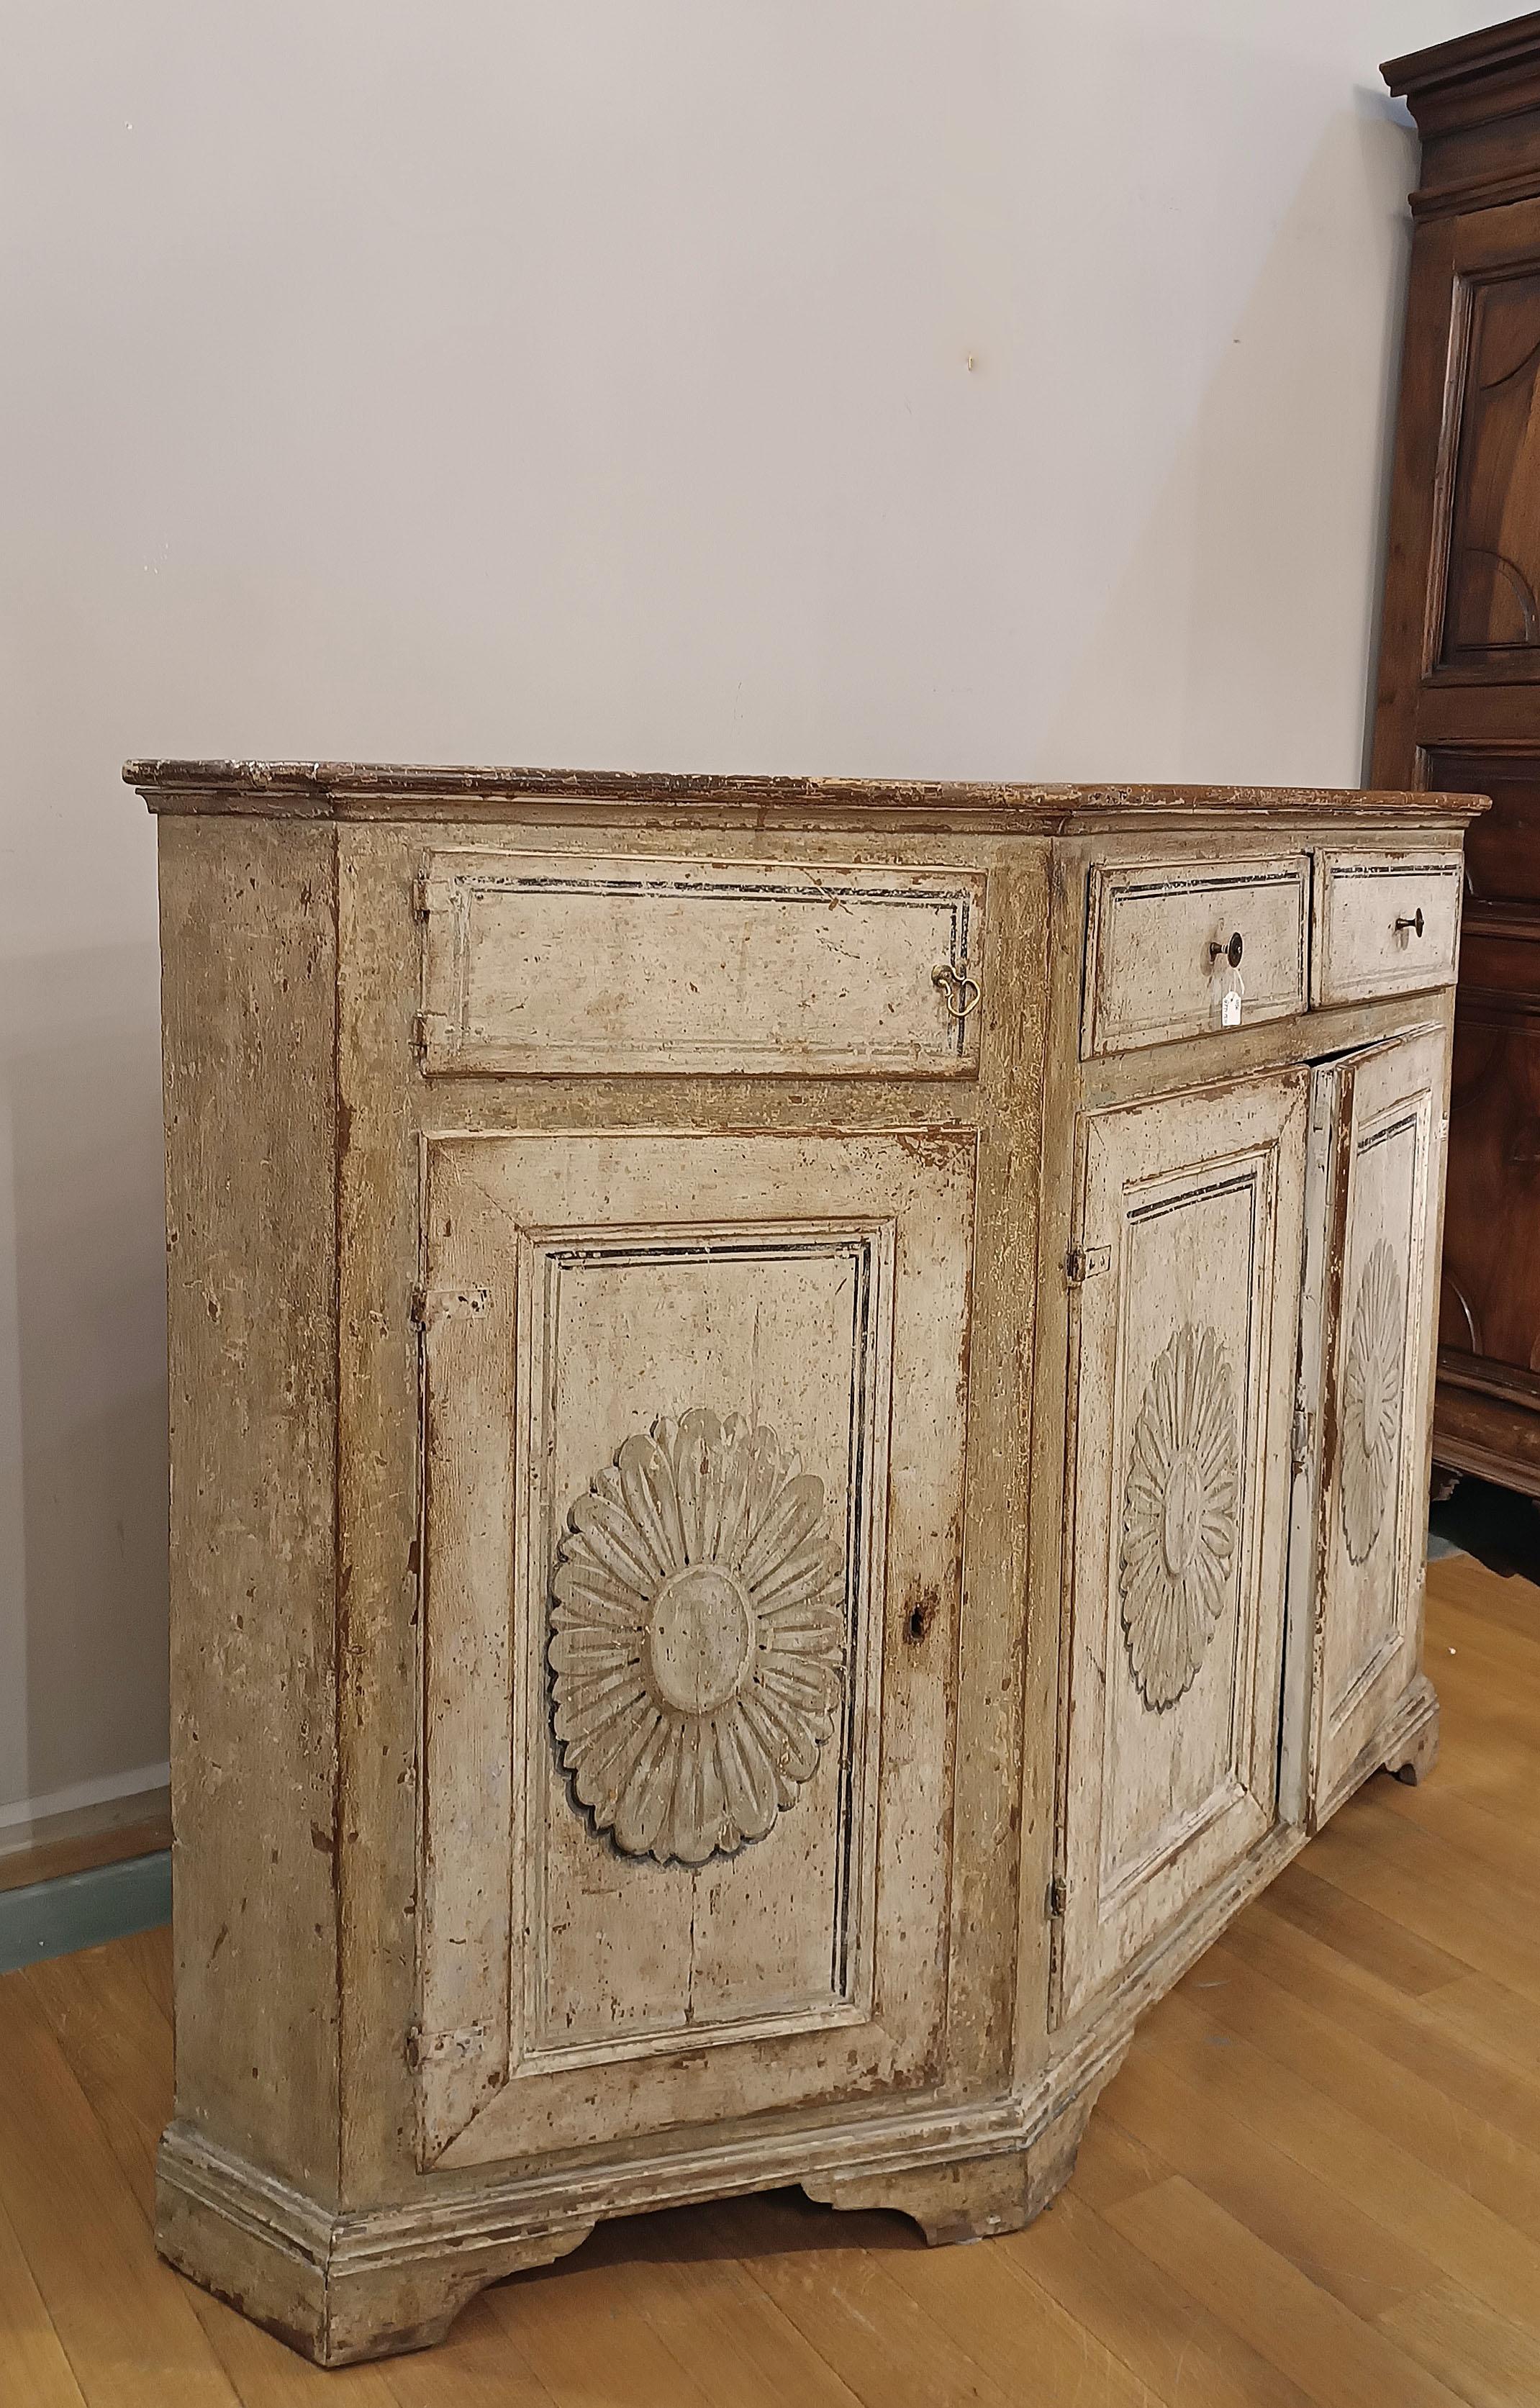 Neoclassical Revival END OF THE 18th CENTURY NEOCLASSICAL SIDEBOARD IN PAINTED WALNUT